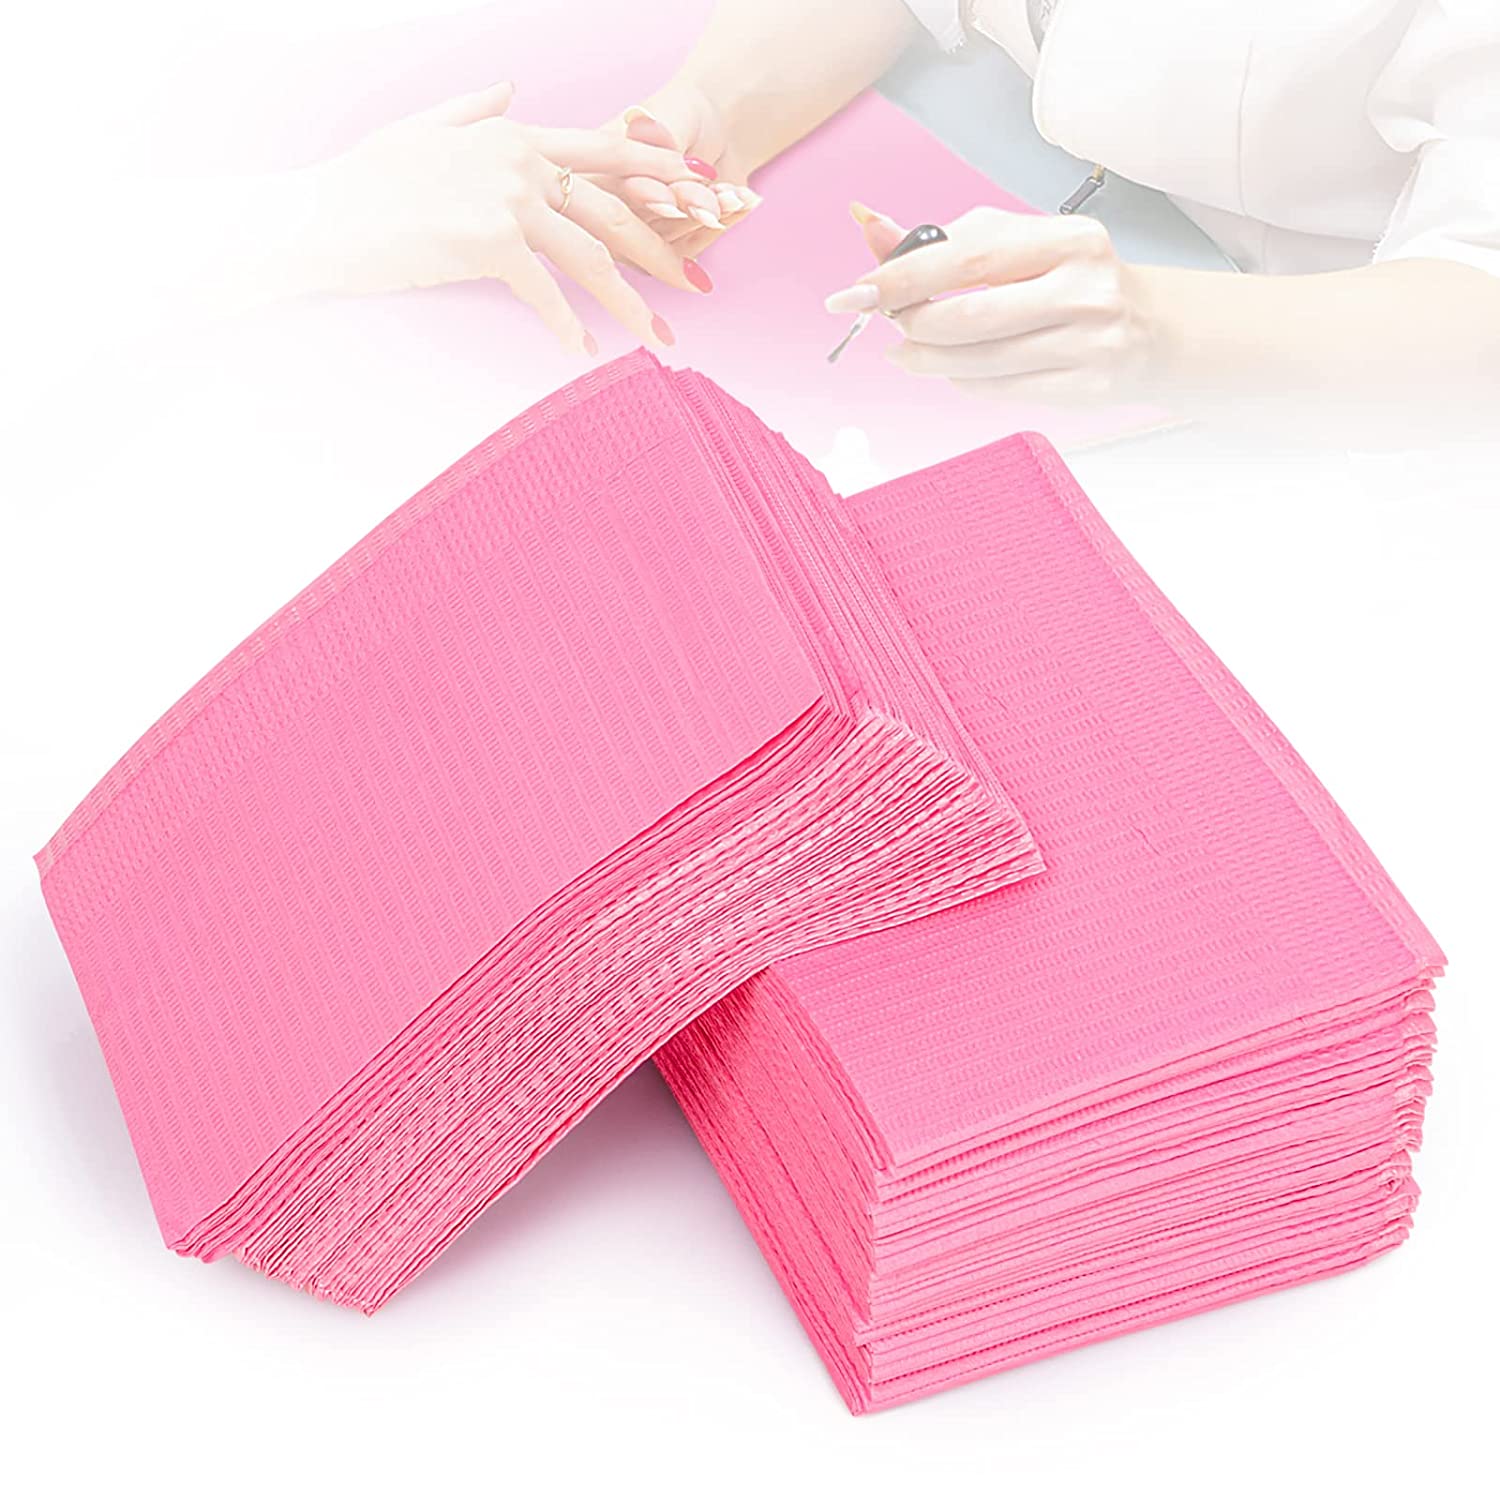 

20pcs Nail Art Table Mat Disposable Clean Pads For Nails Care Gel Polish Waterproof Tablecloths Manicure Tool Accessories